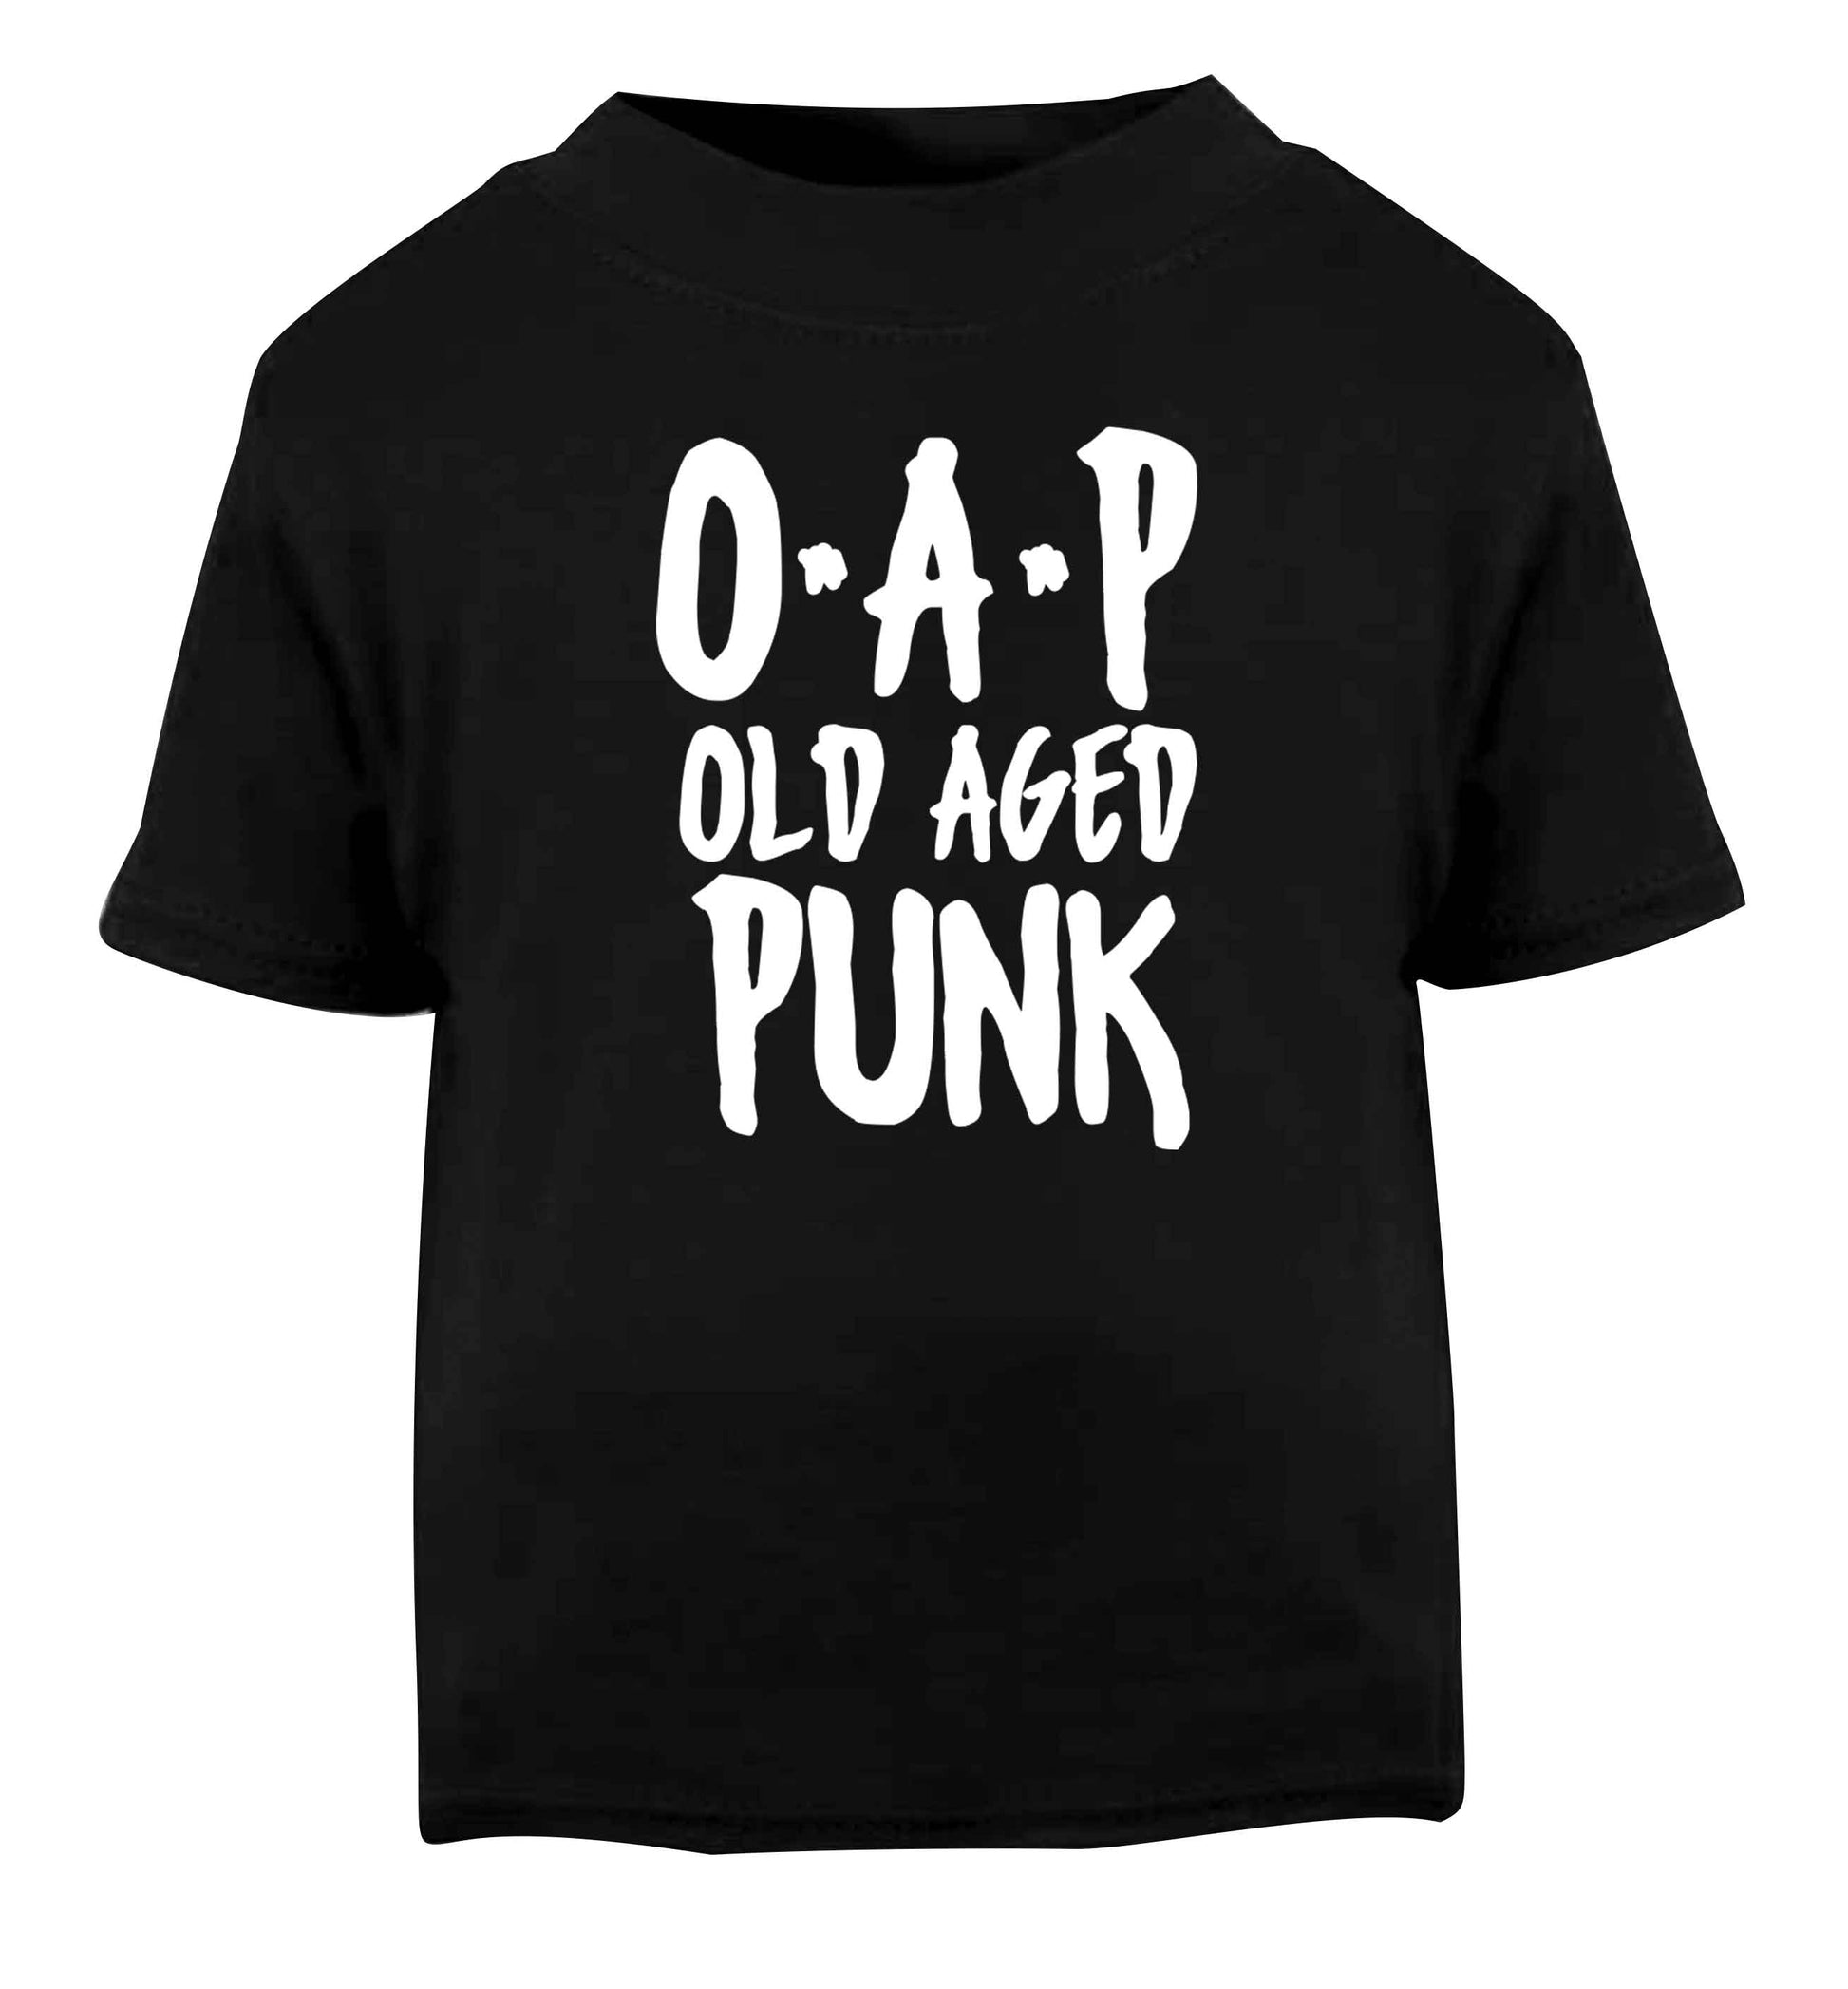 O.A.P Old Age Punk Black Baby Toddler Tshirt 2 years